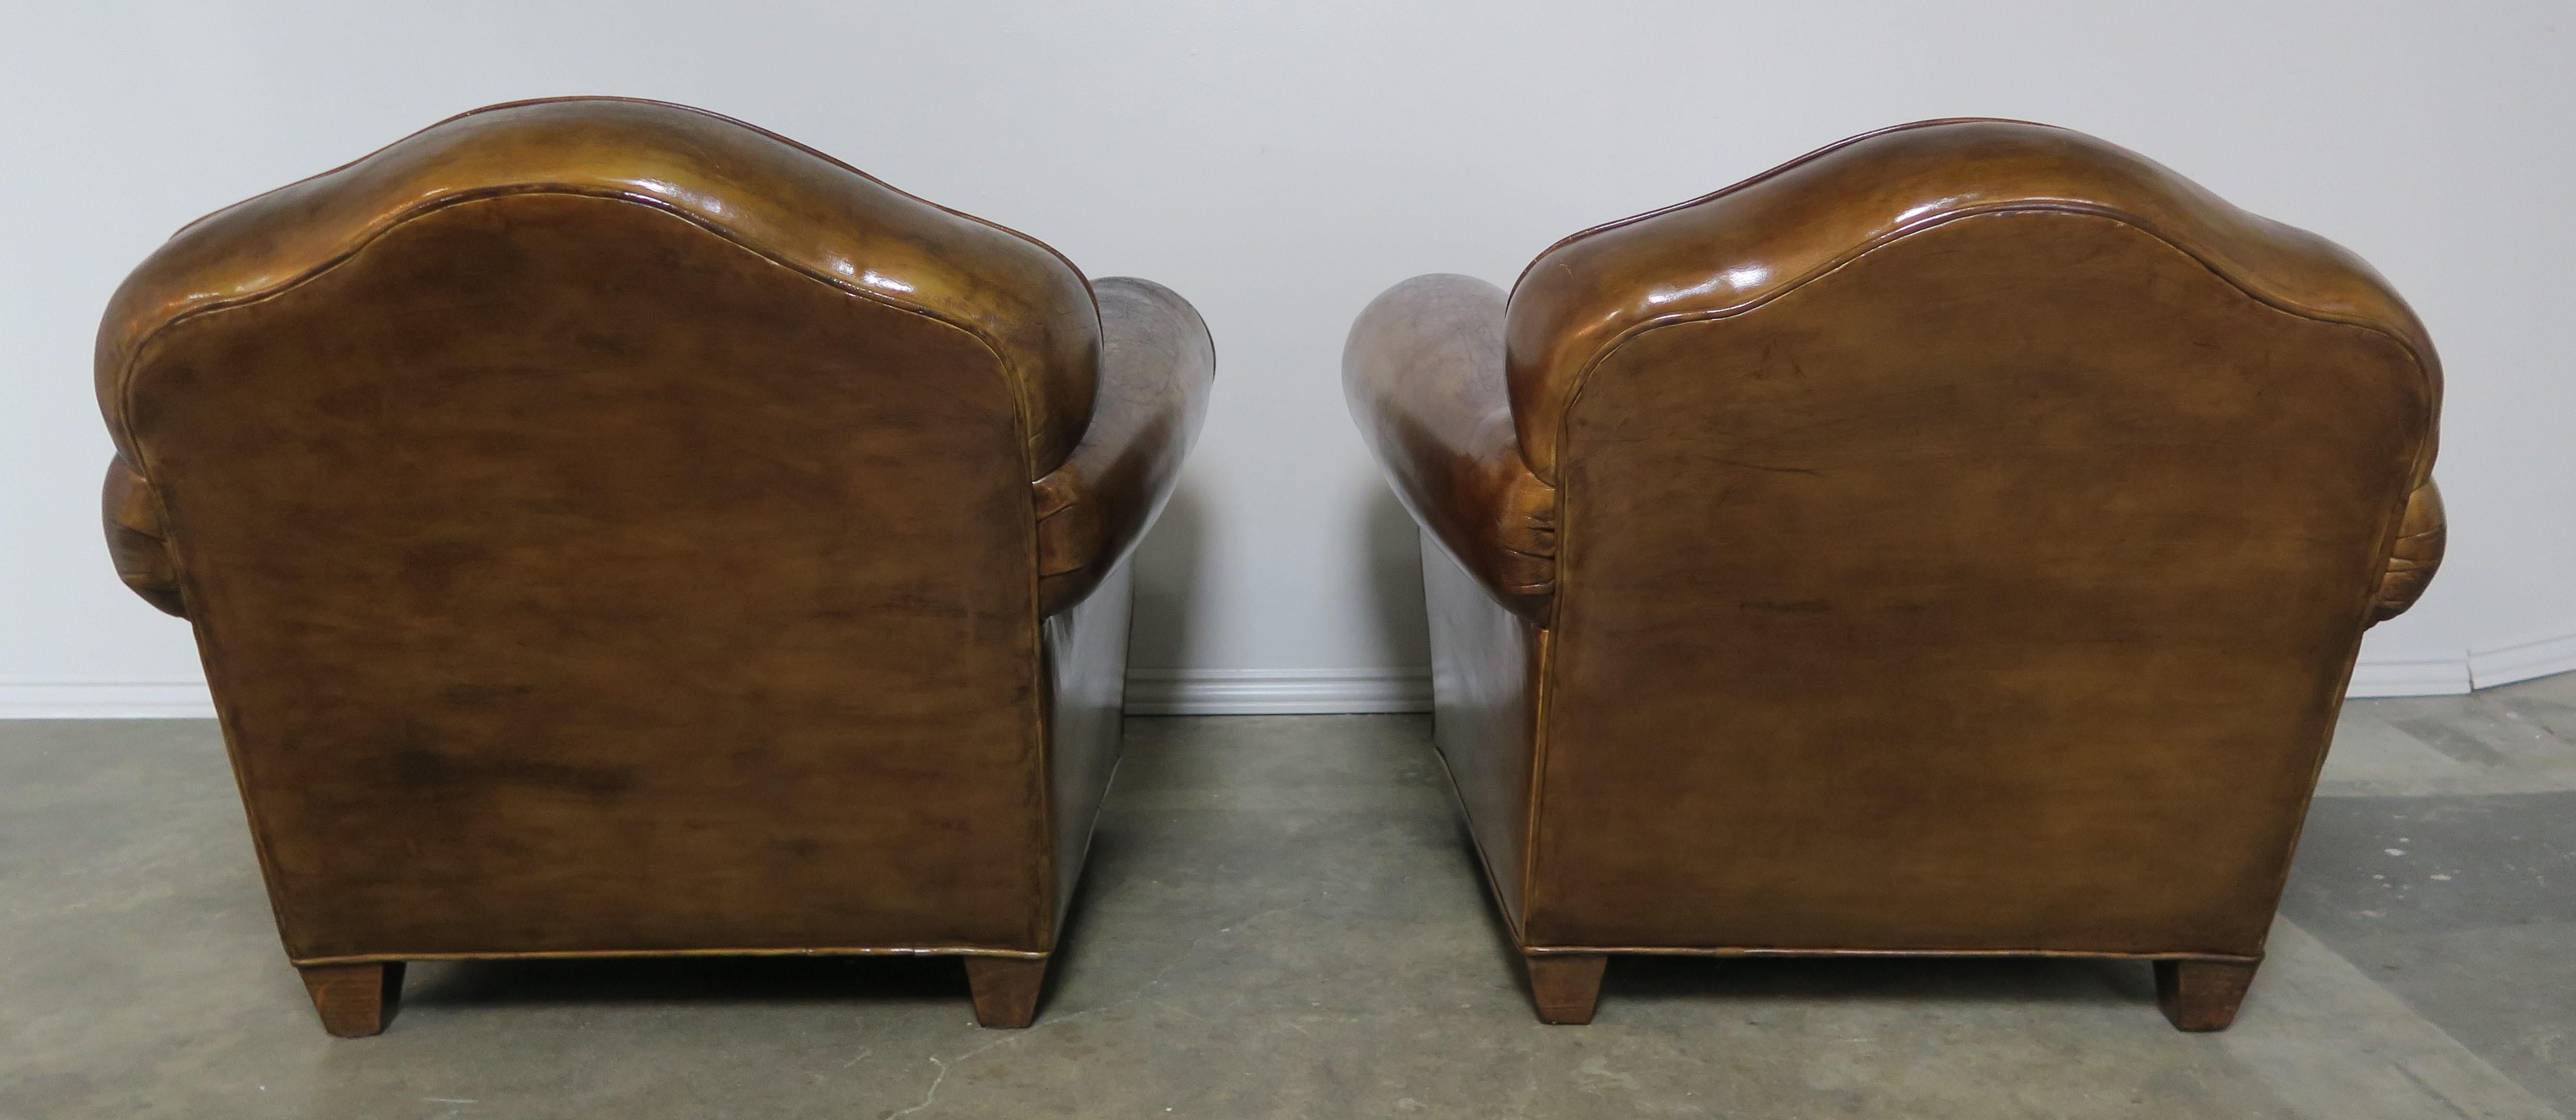 Pair of French Leather Upholstered Club Chairs, circa 1940s 6